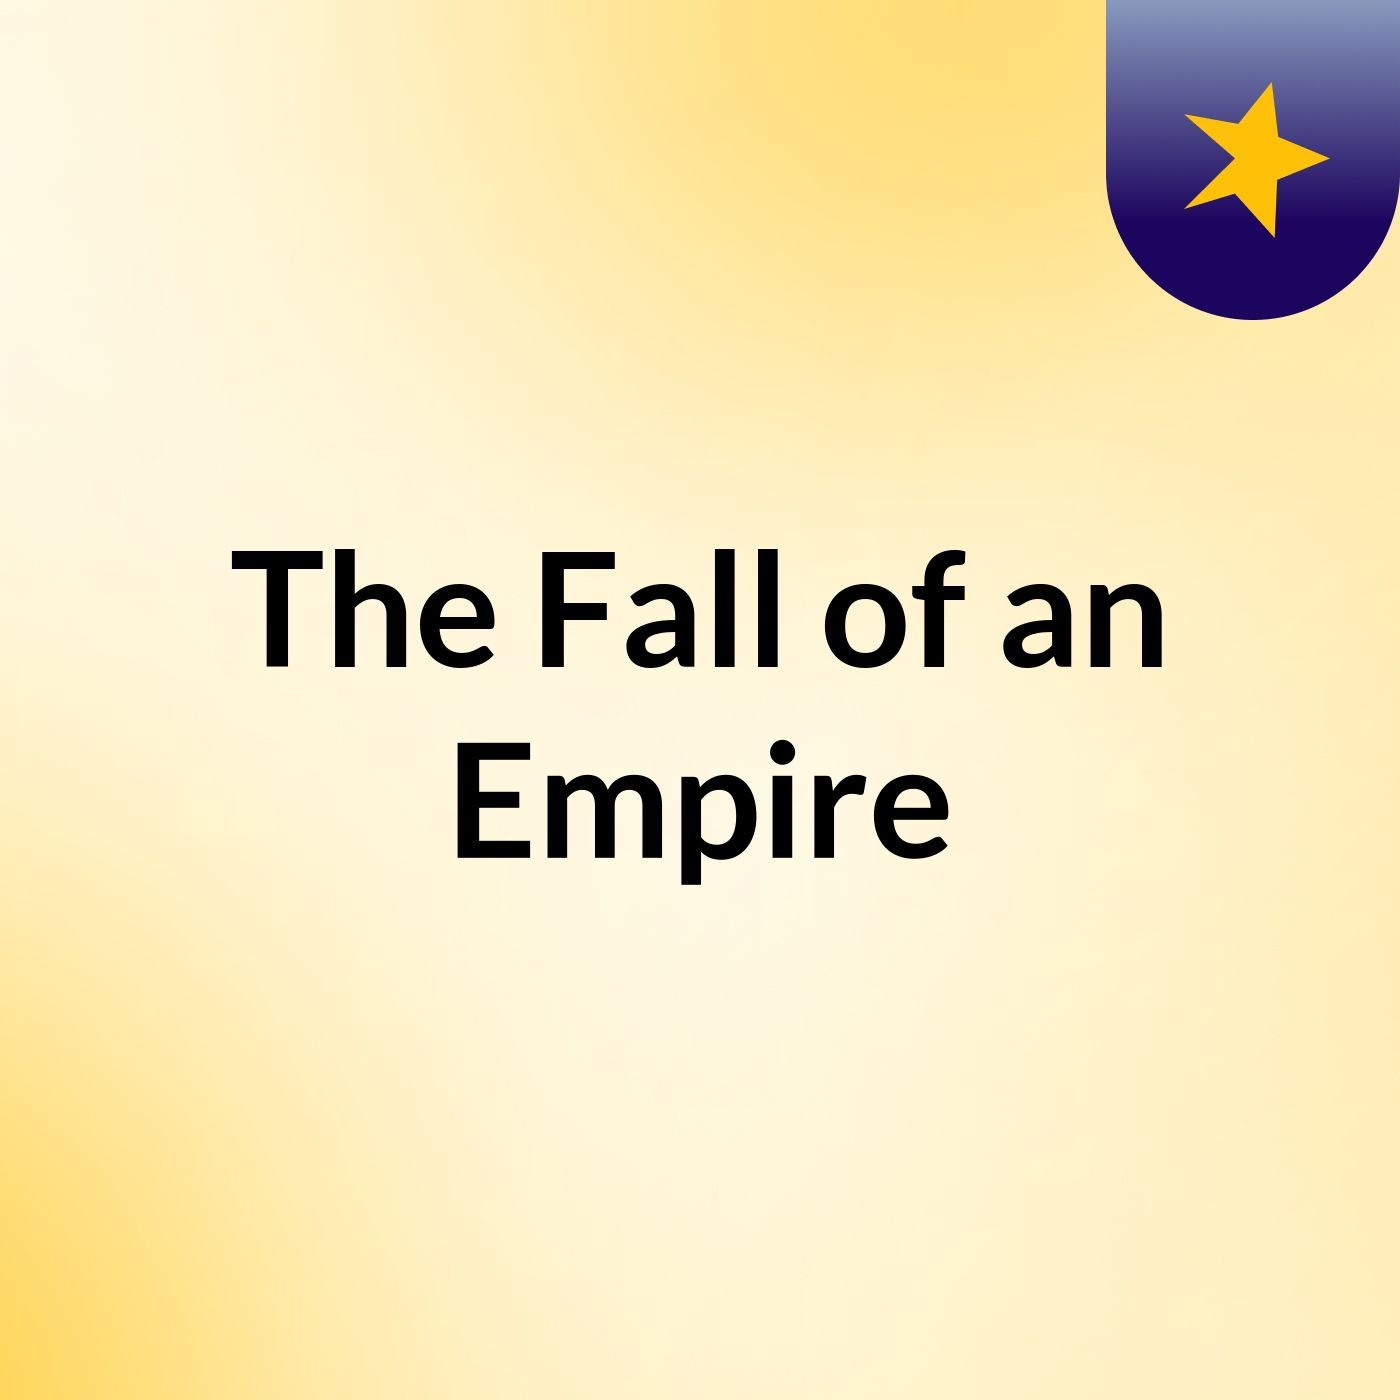 The Fall of an Empire